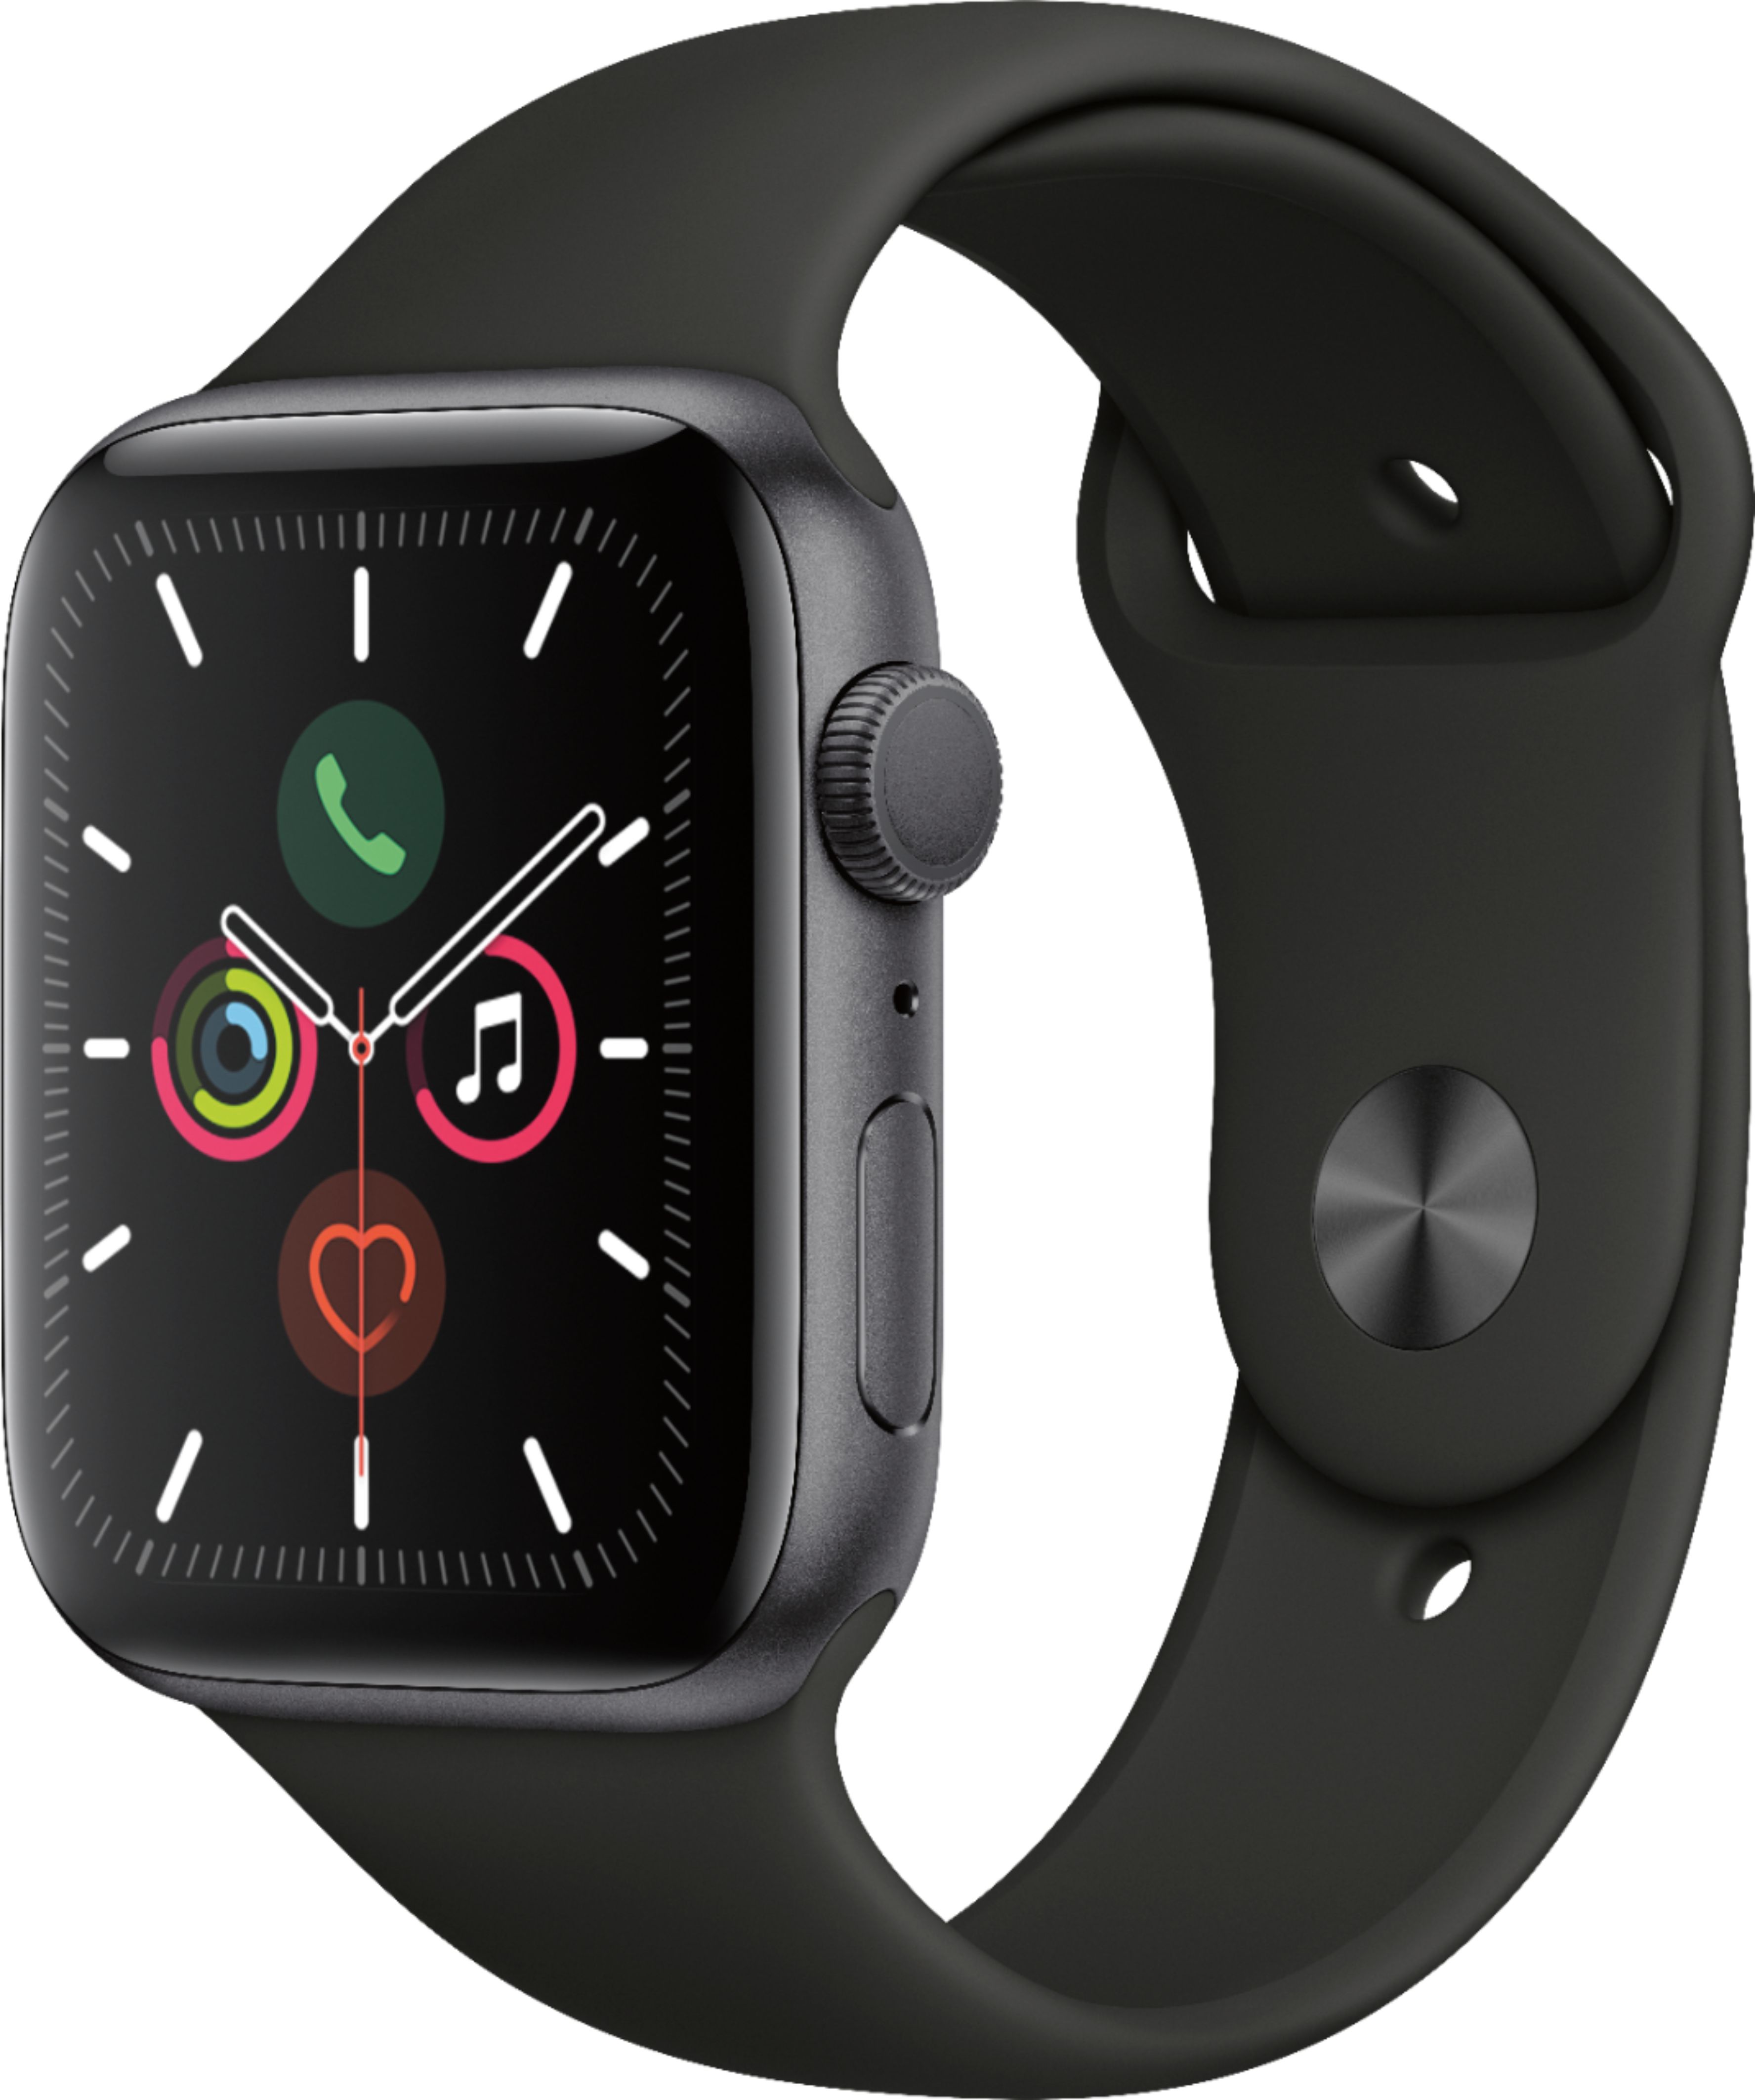 Apple Watch Series 5 (GPS) 44mm Space Gray Aluminum Case with Black Sport Band - Space Gray Aluminum